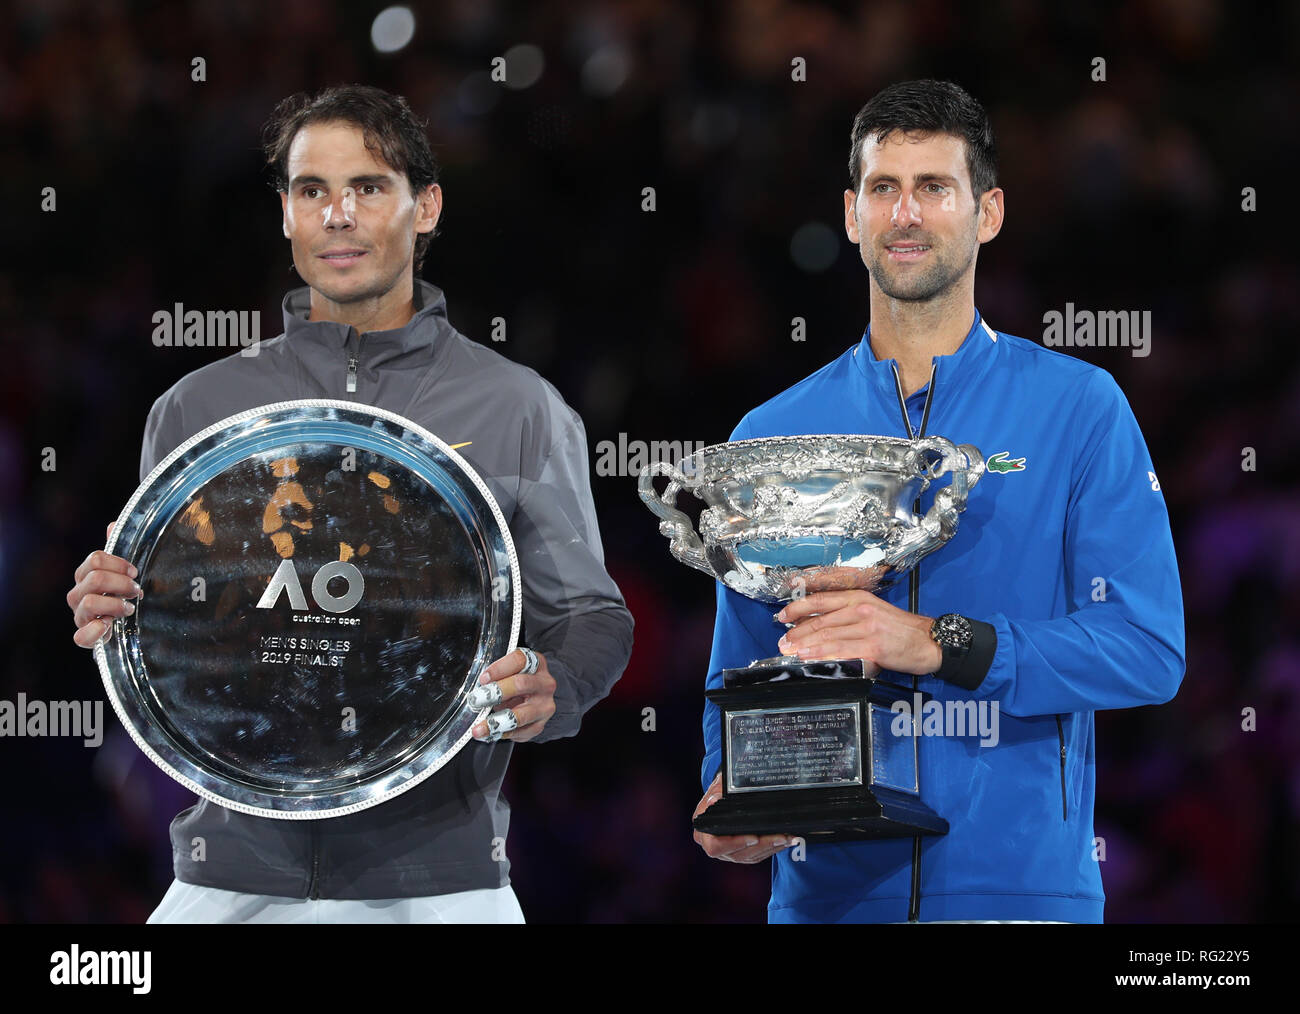 Melbourne, Australia. 27th Jan, 2019. Novak Djokovic (R) of Serbia and  Rafael Nadal of Spain react during the trophy awarding ceremony after the  men's singles final match at 2019 Australian Open in